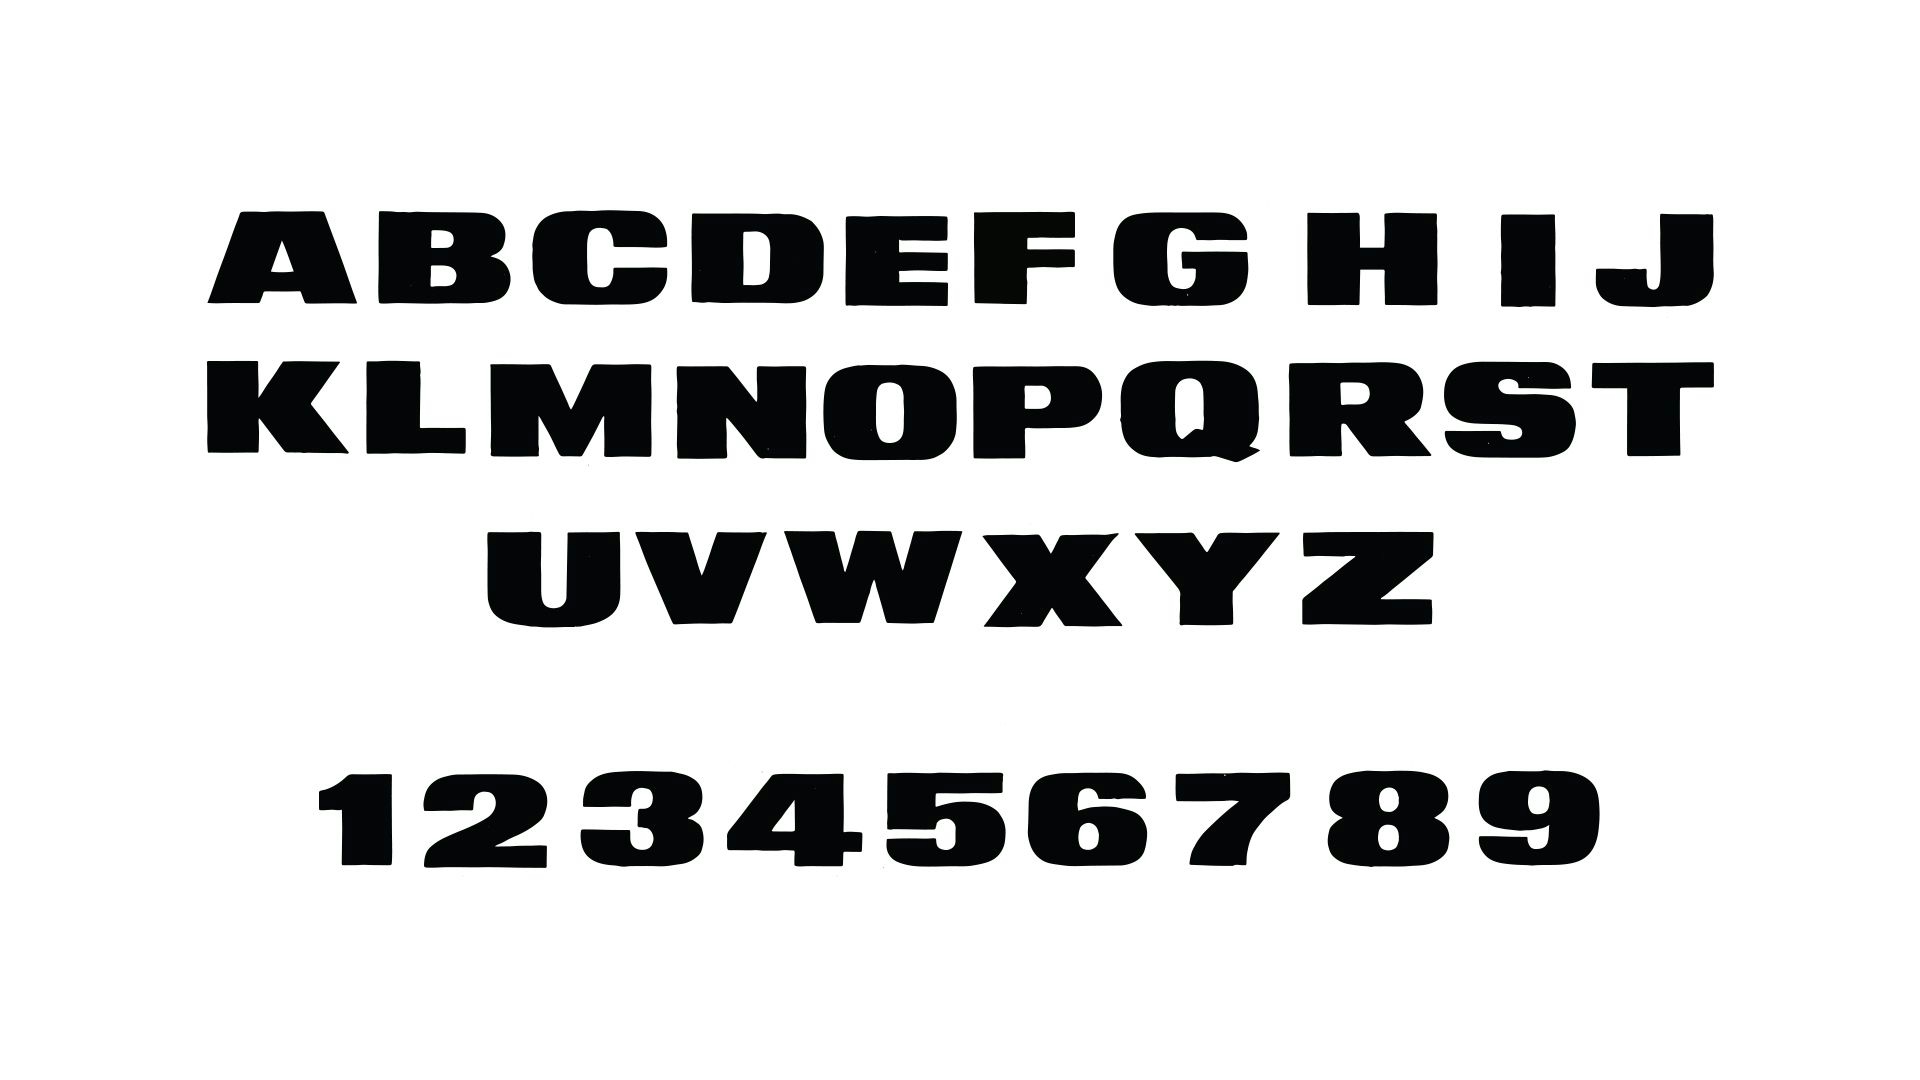 Glyph set for the Fender Next typeface used across the campaign